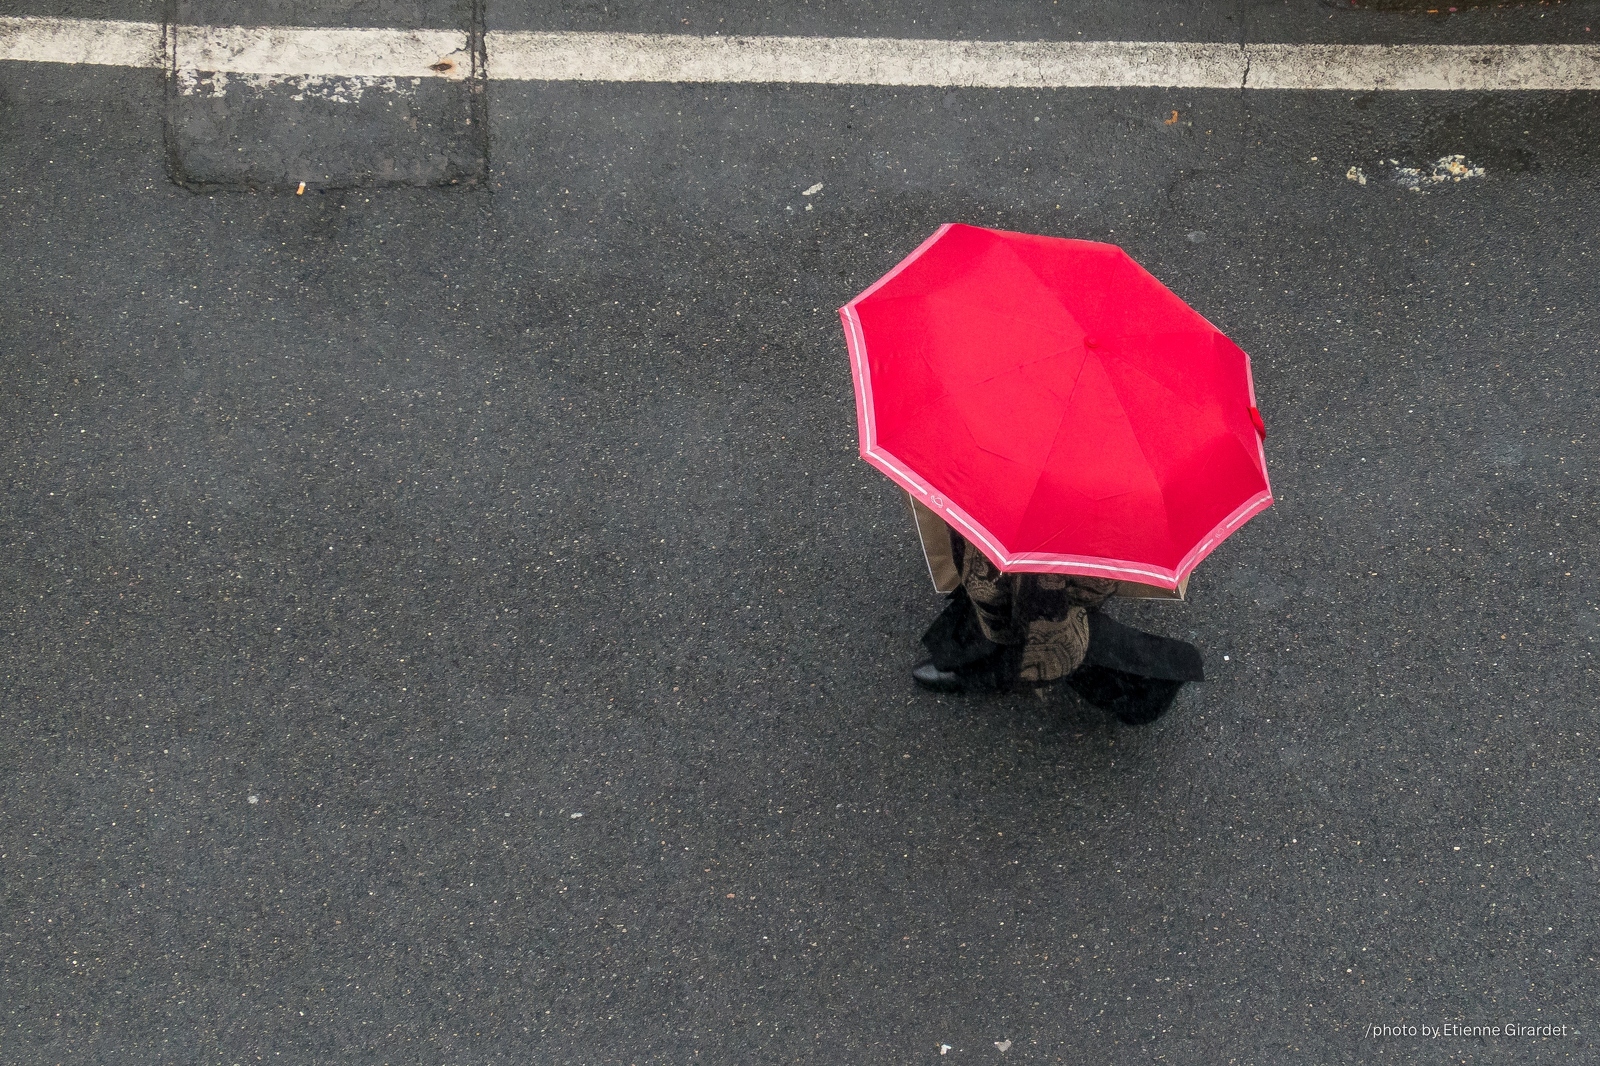 201910_09_RXX07887-woman-umbrella-from-above-by-E-Girardet.jpg